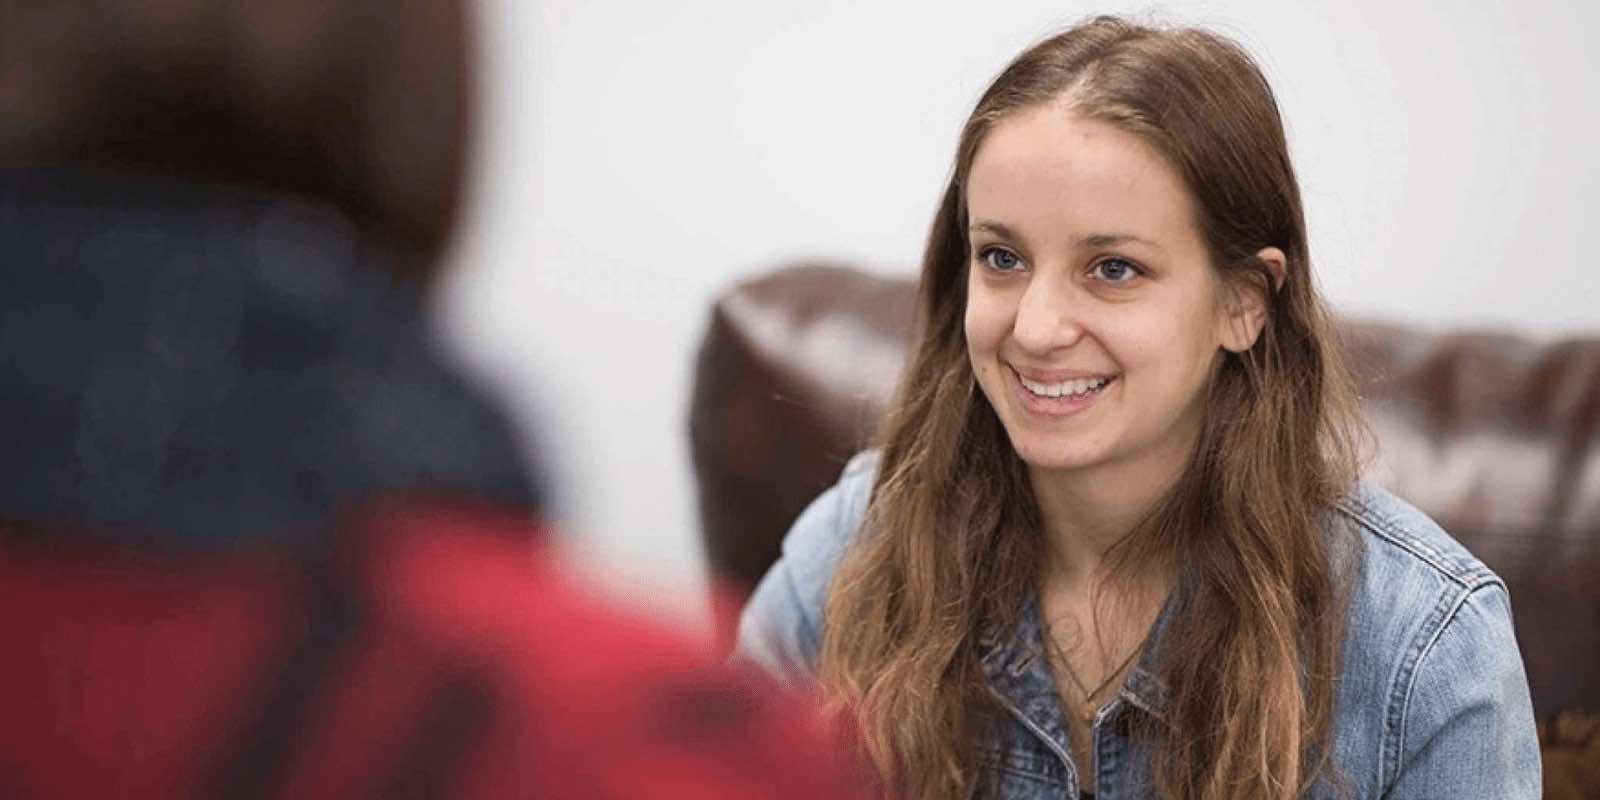 A teen girl smiling at the therapist in front